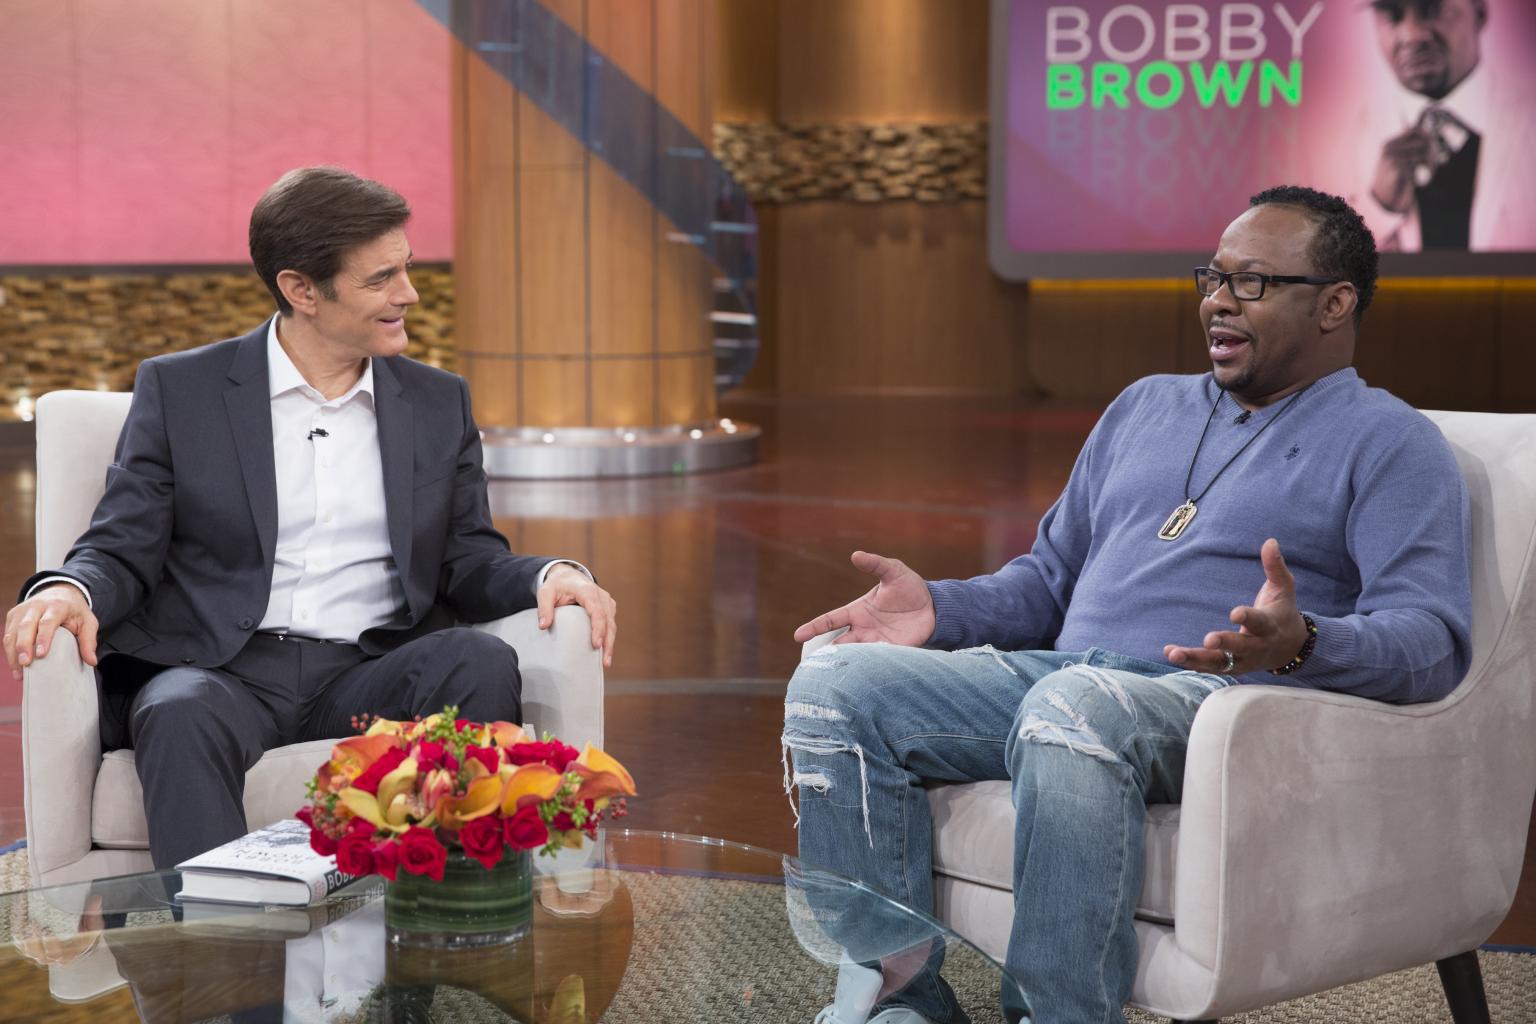 Bobby Brown Says Jail Got Him Clean: â€˜I Didnâ€™t Want to Be Incarcerated Ever Againâ€™